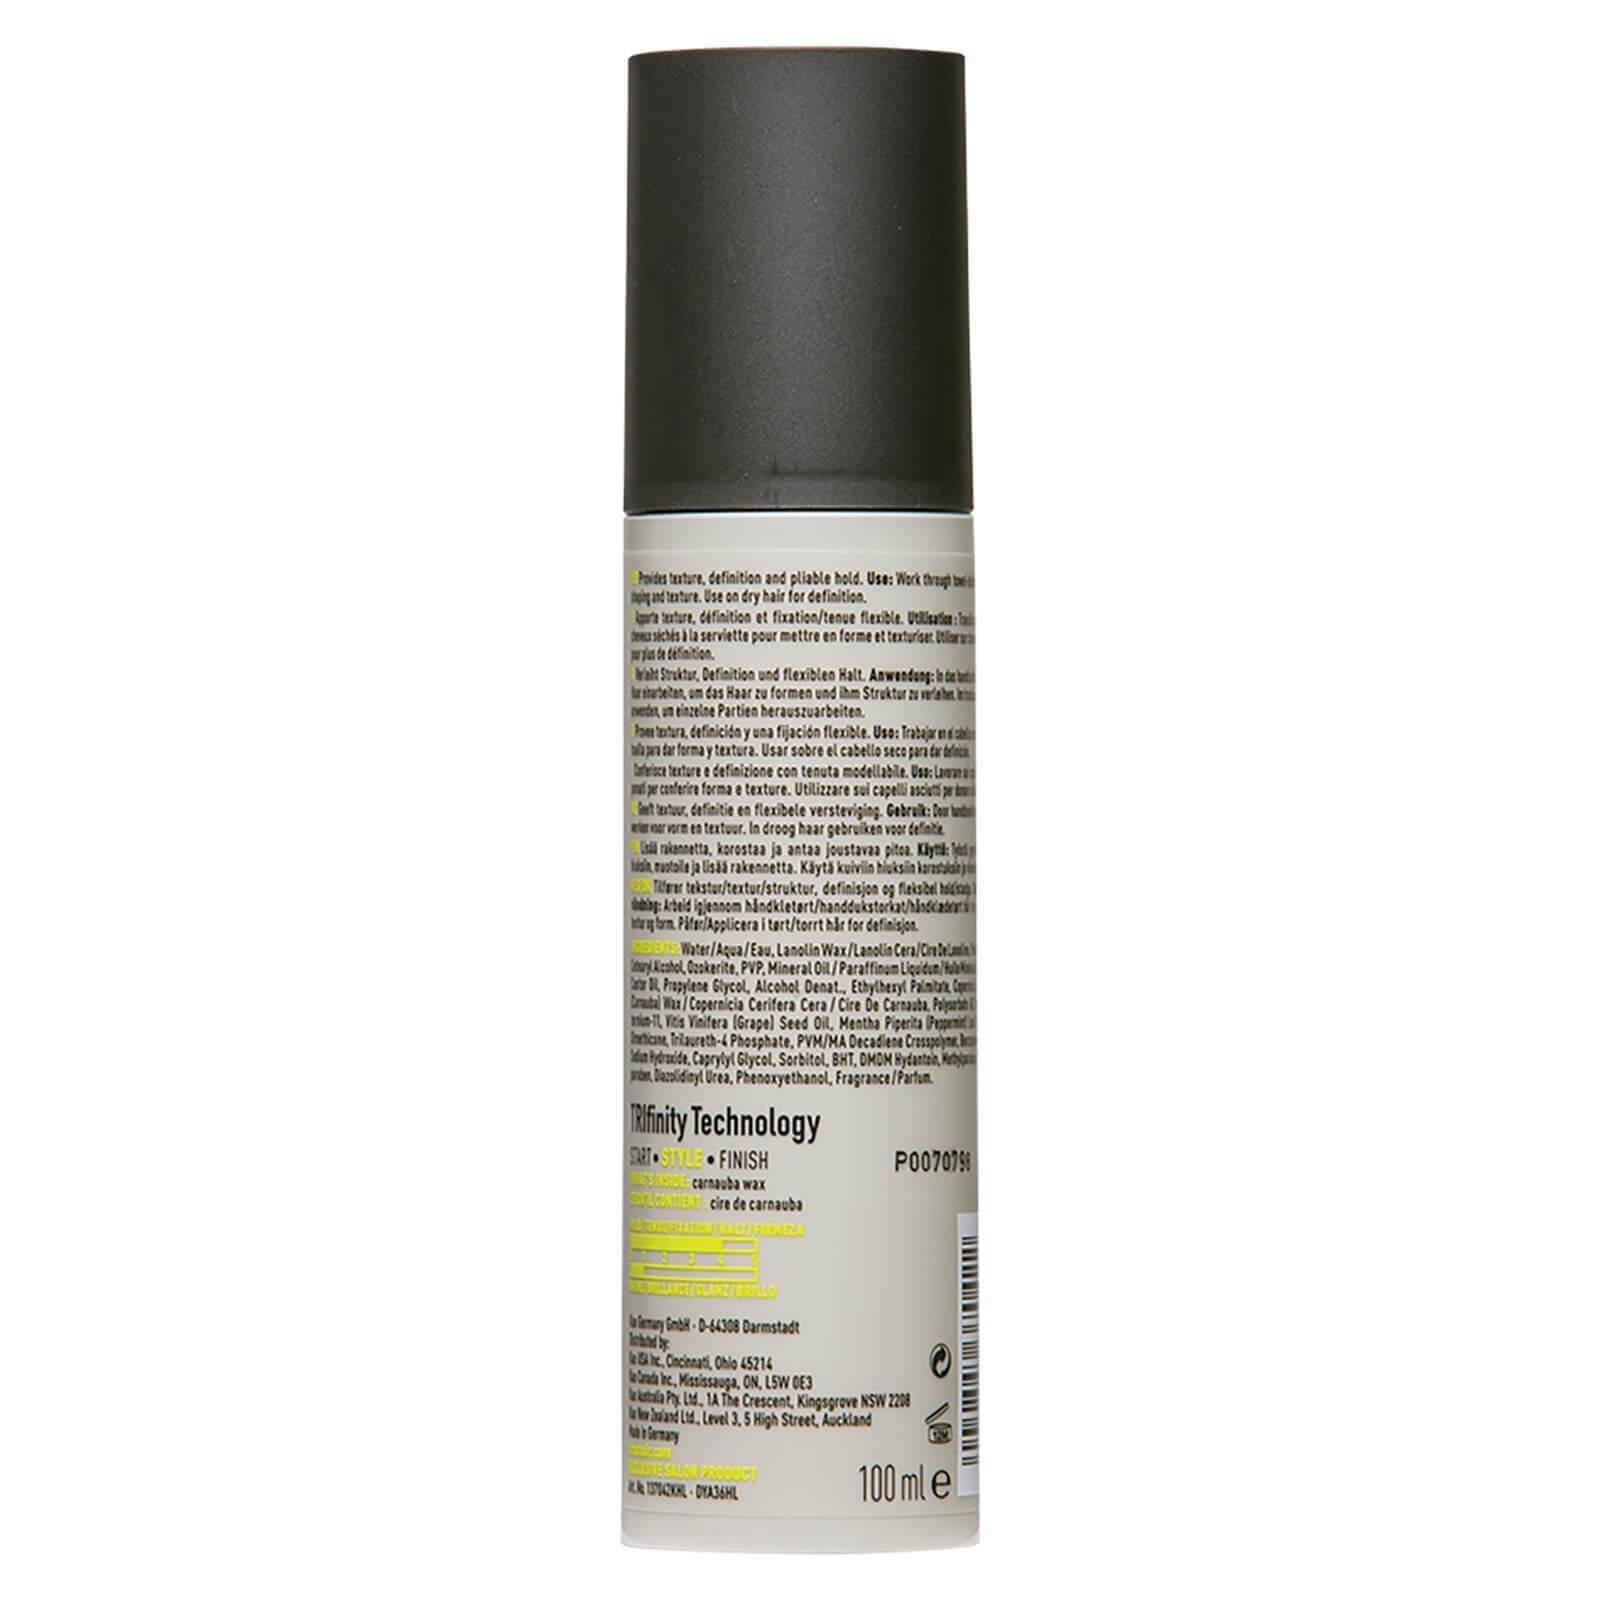 KMS Hairplay Molding Paste 100ml - KMS